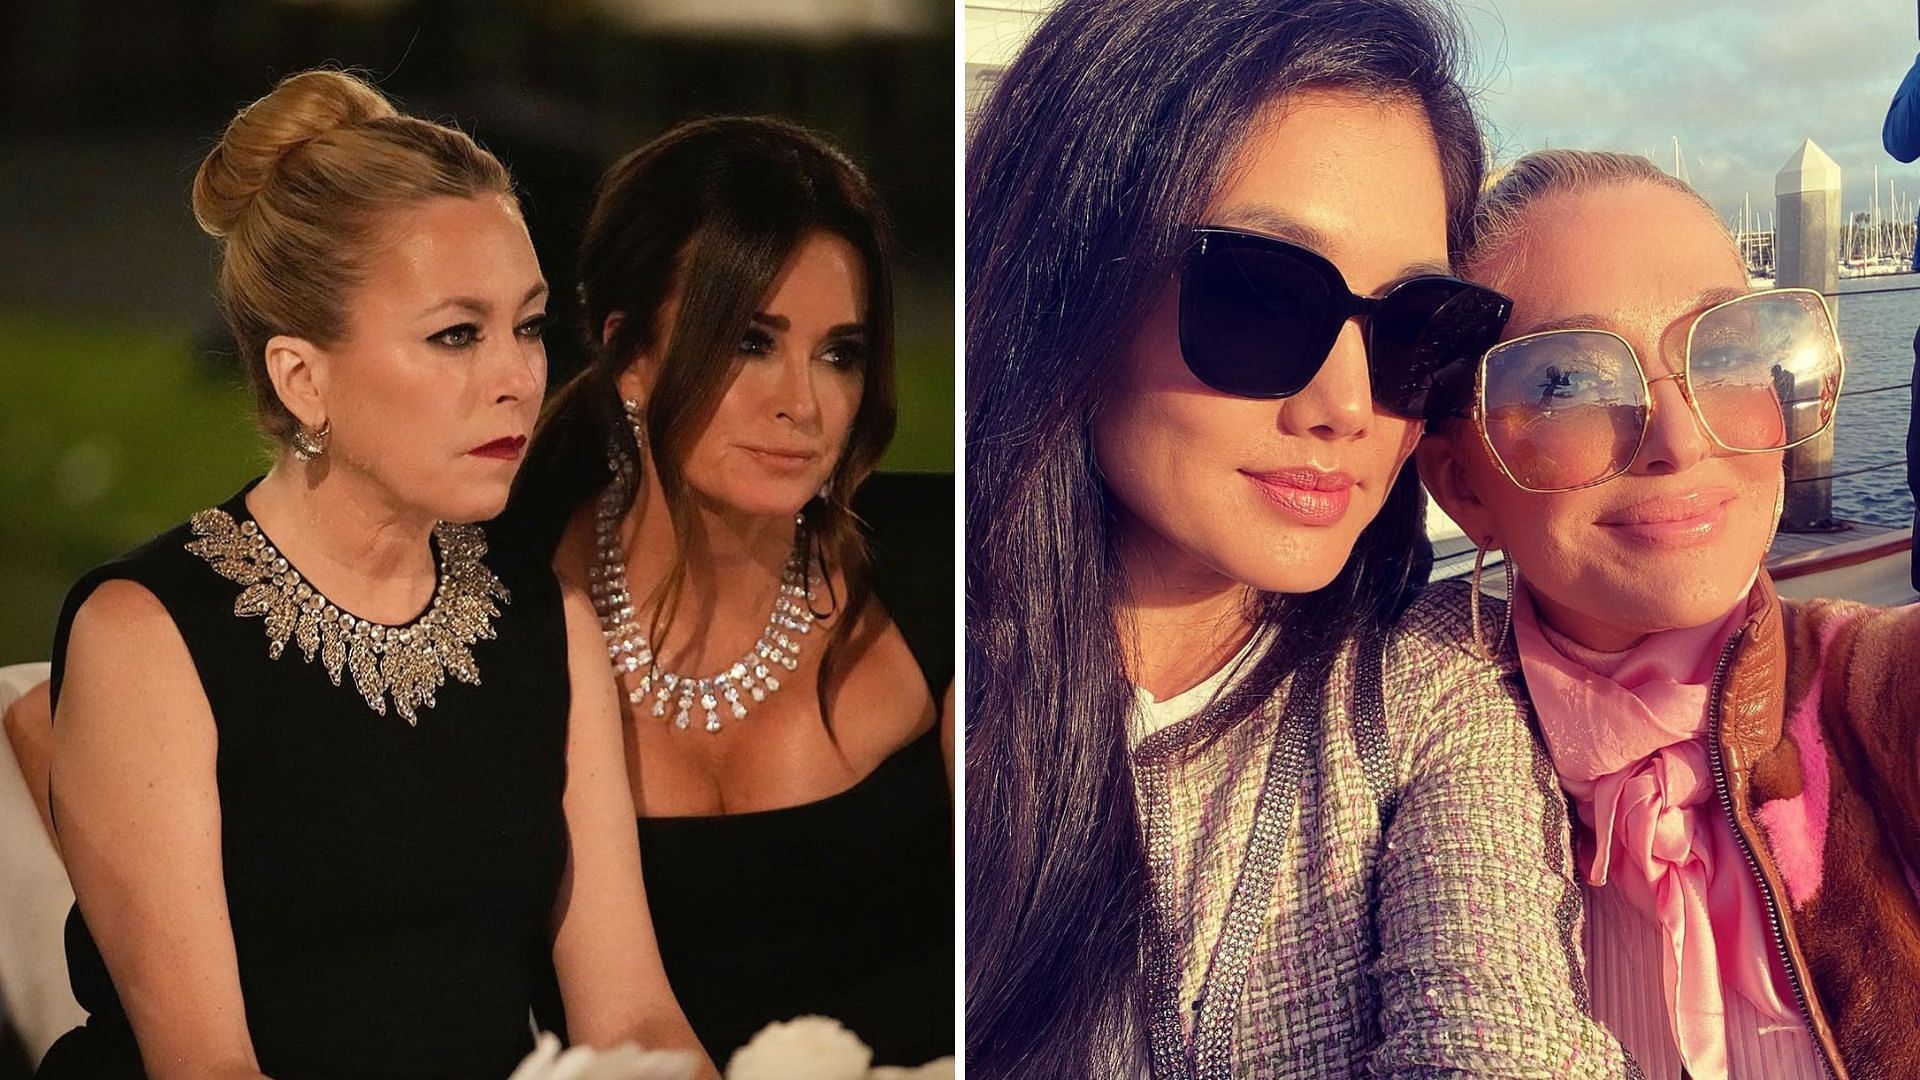 Kyle and Erika stir the pot in Crystal and Sutton&#039;s feud (Image via Instagram/kylerichards18 and theprettymess)